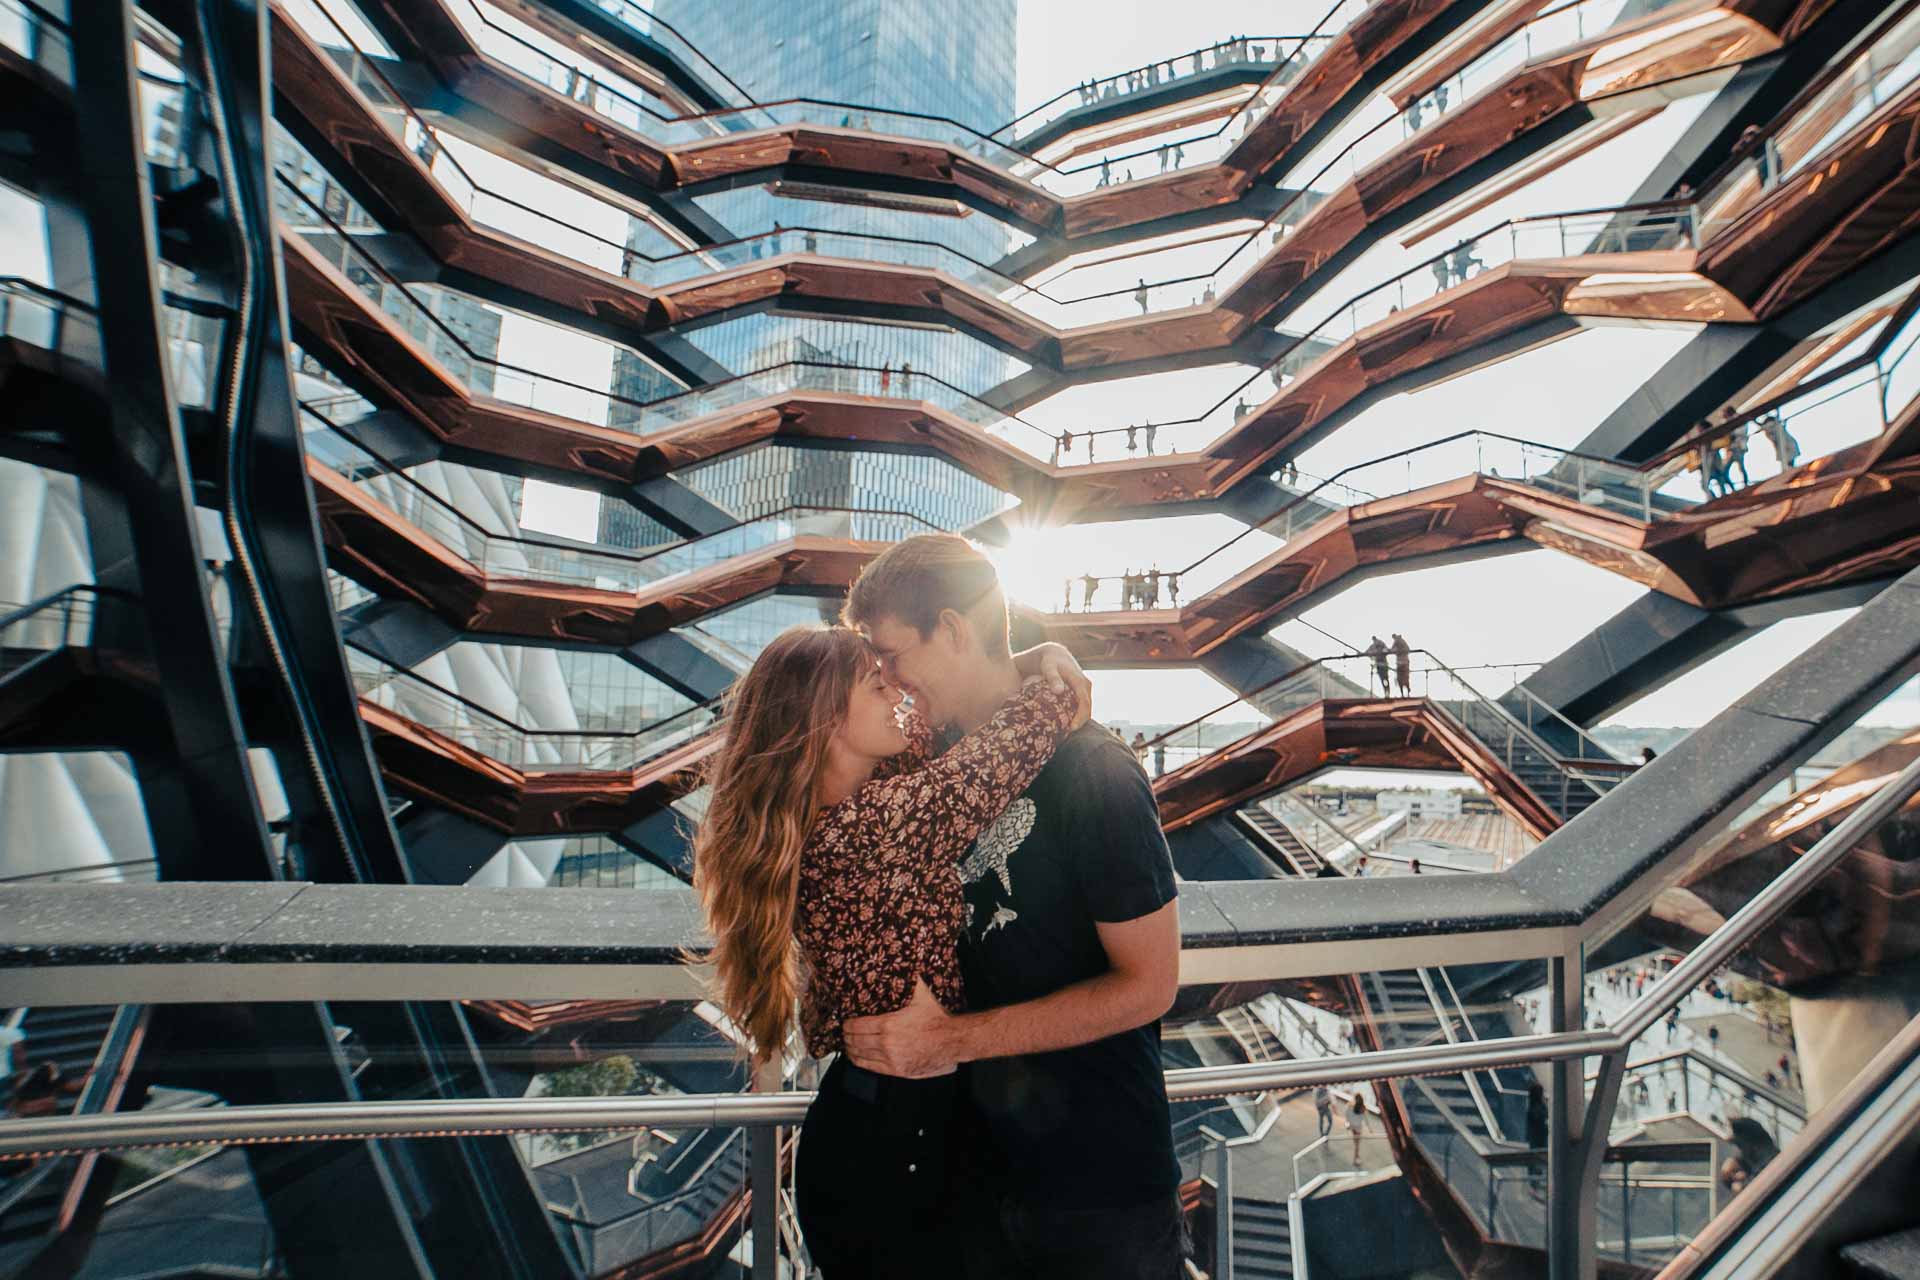 engagement photo shoot at The Vessel, NYC